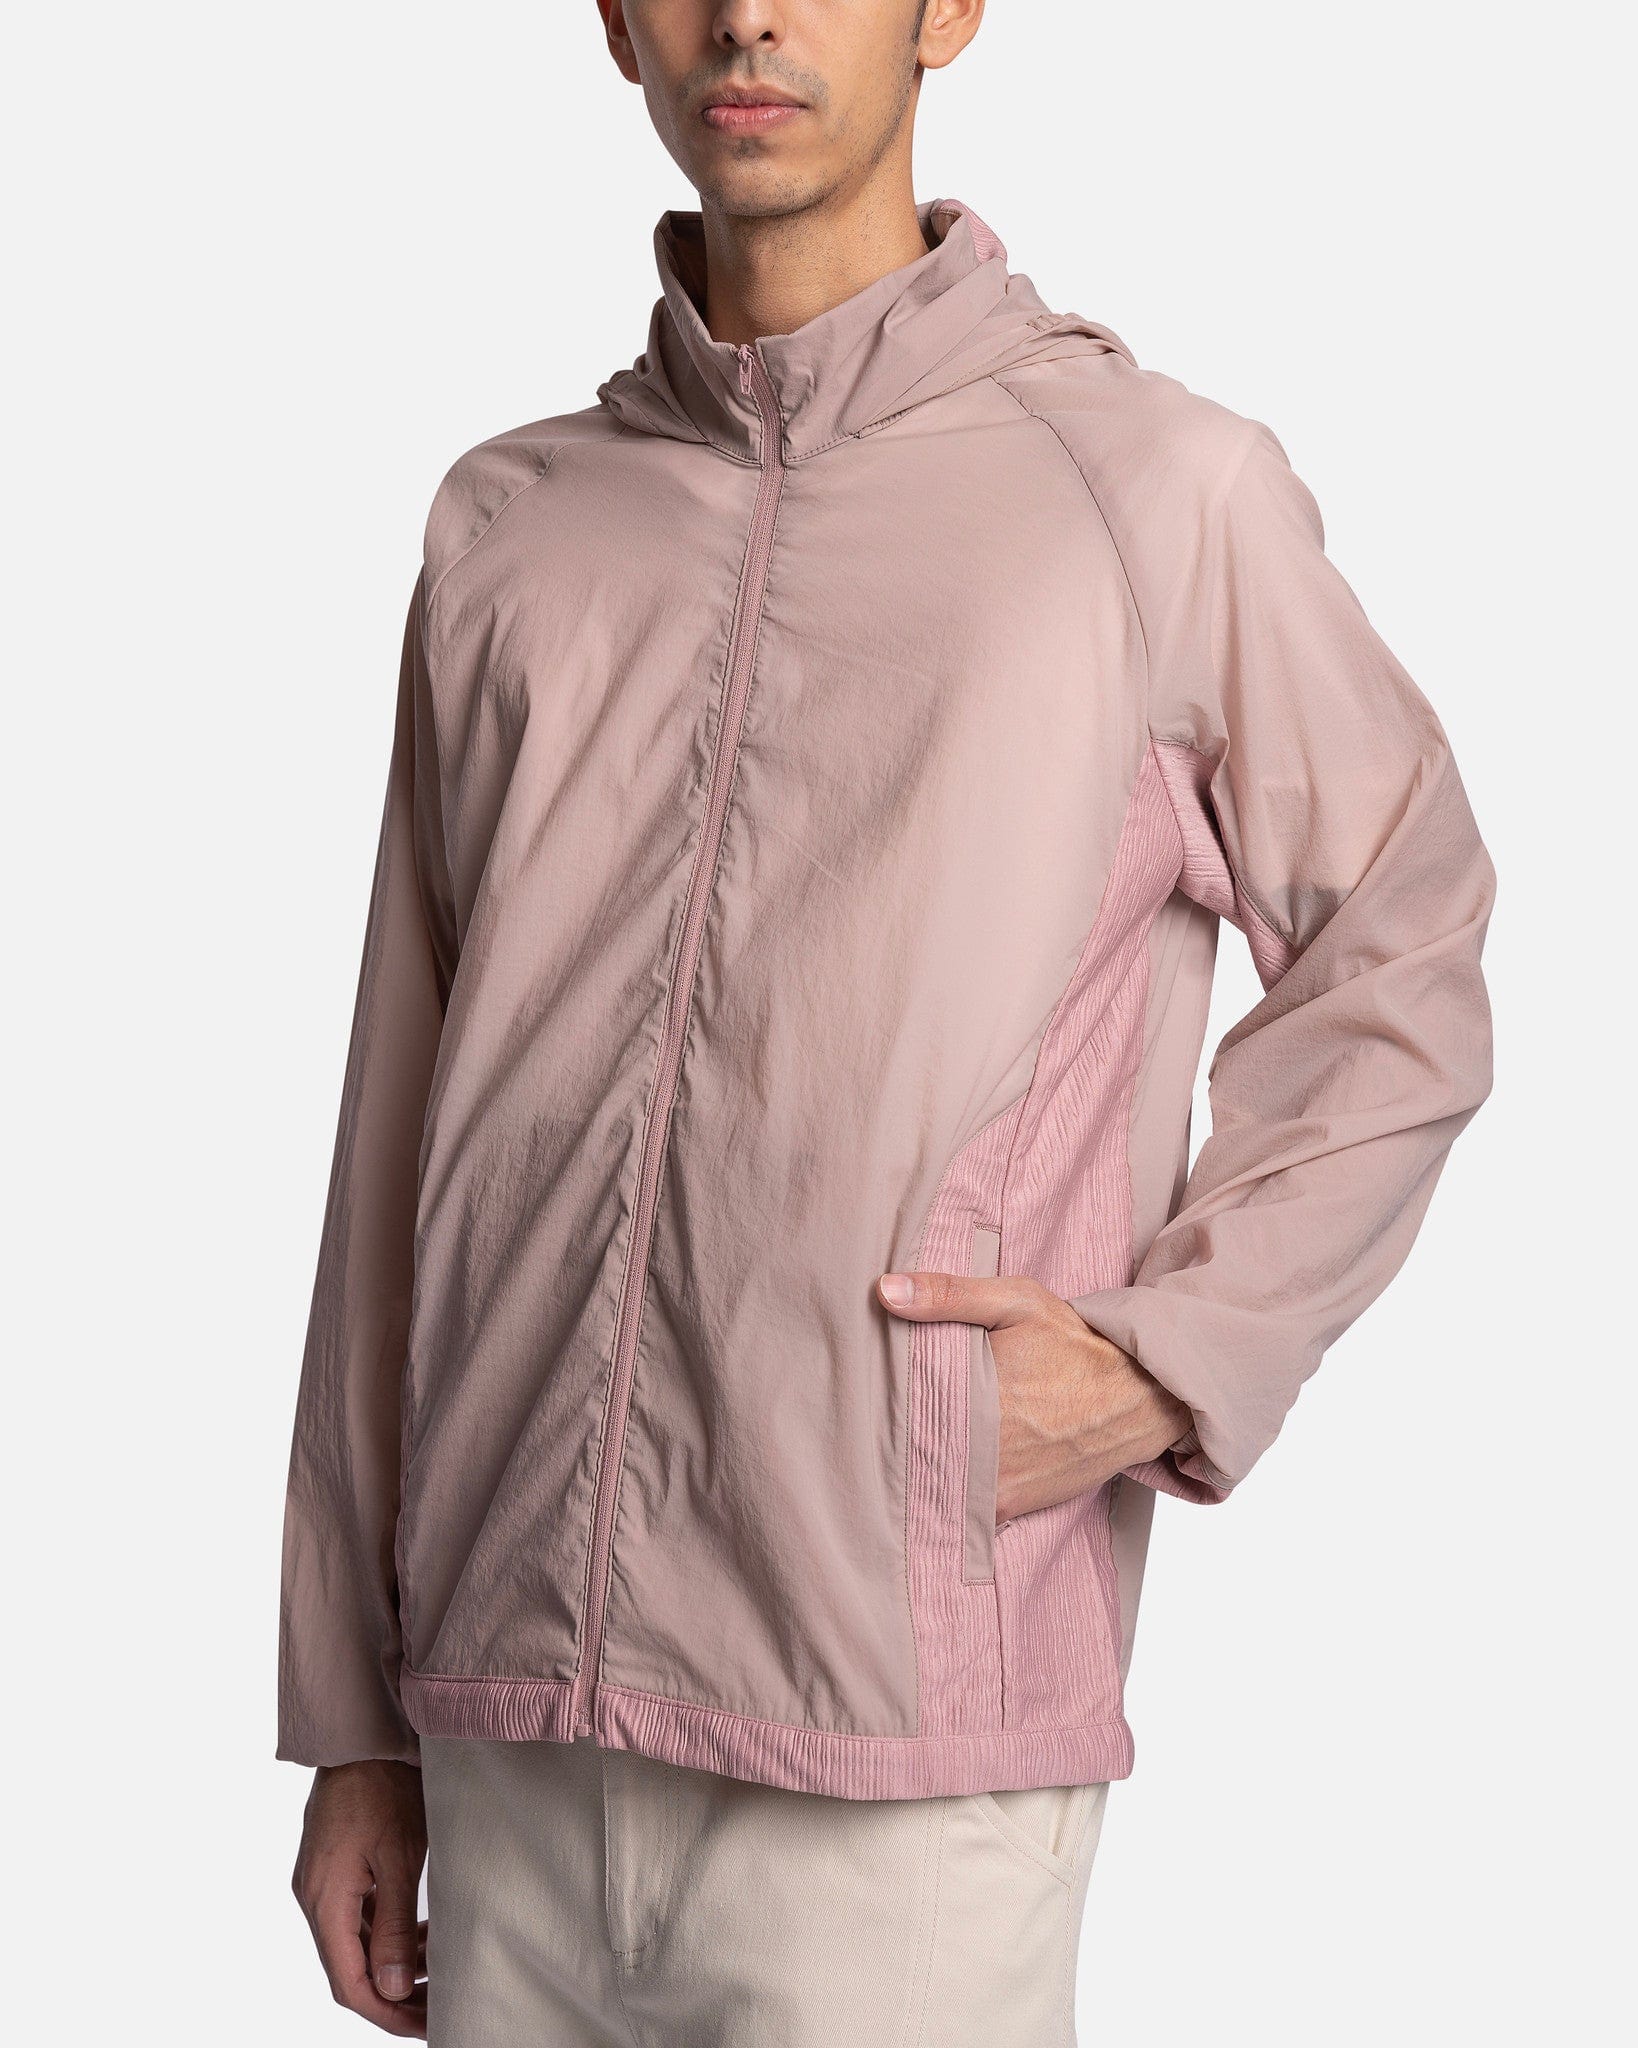 EP.3 03 Jacket in Silver Pink